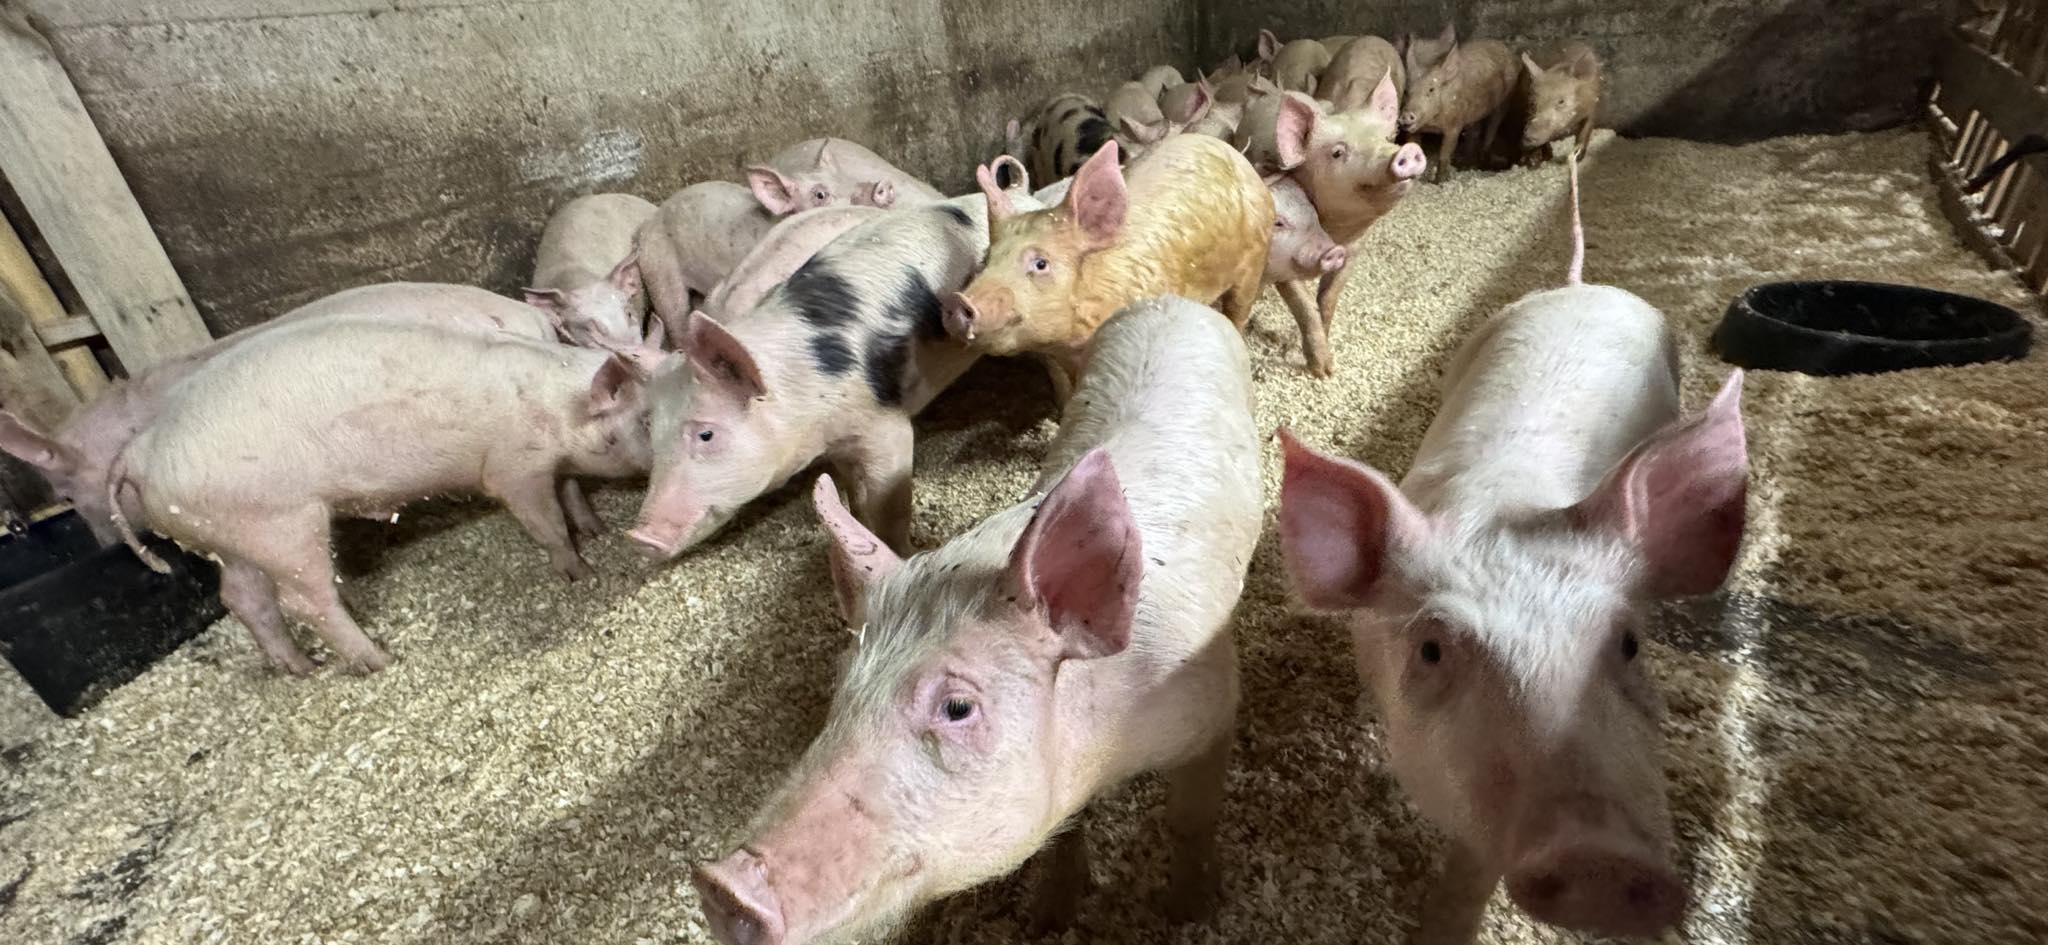 THINGS YOU NEED TO KNOW FOR A SUCCESSFUL PIG FARMING